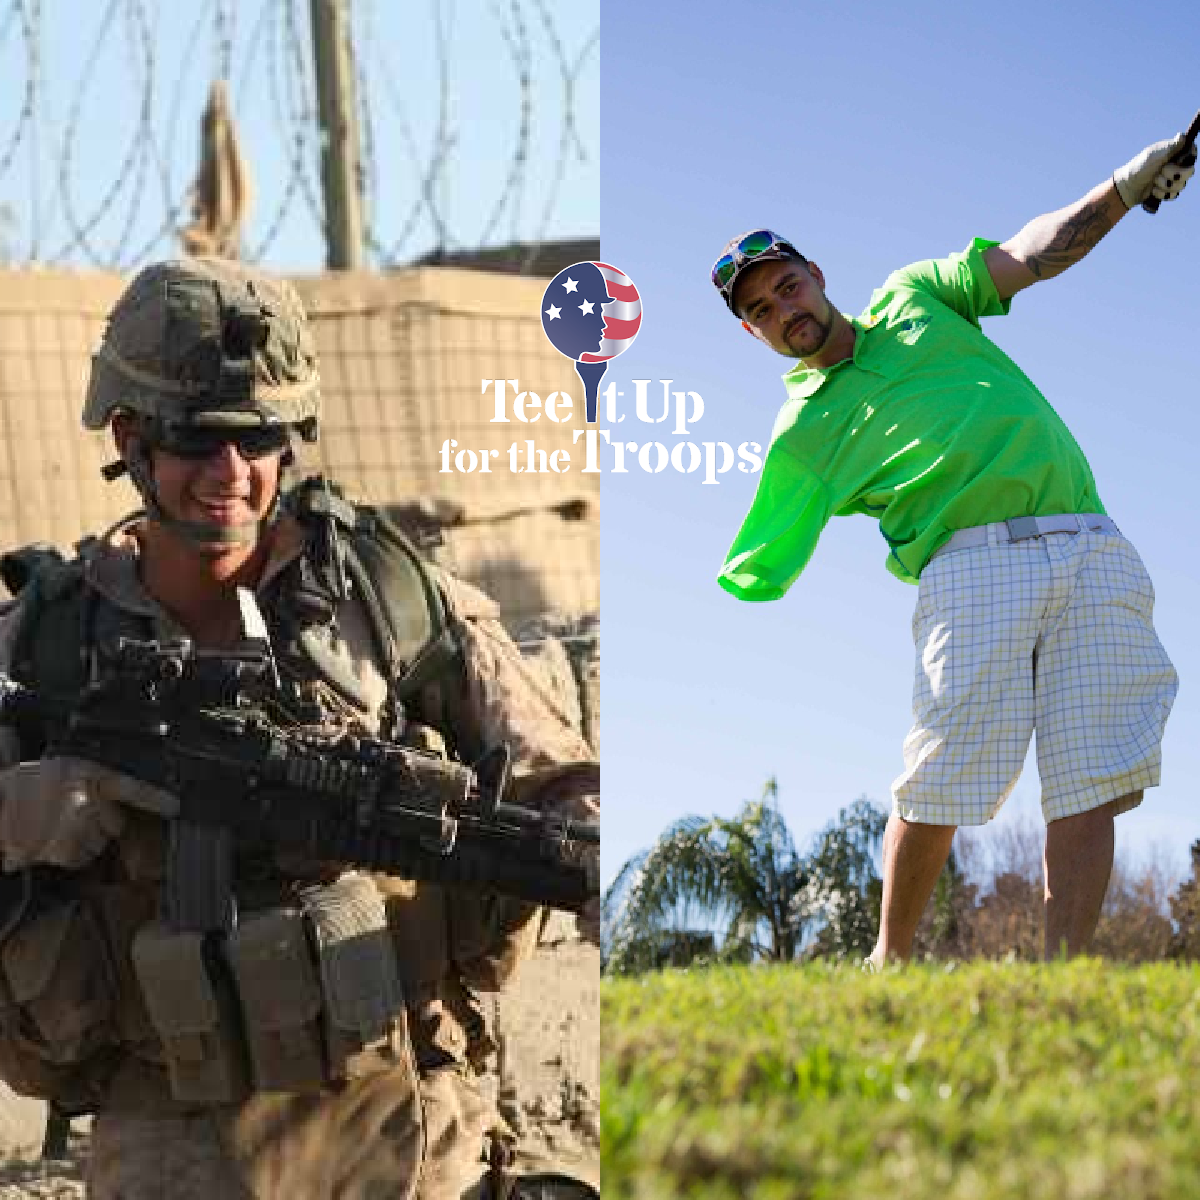 Derek Goodridge, Wounded Veteran and Ambassador for Tee It Up for the Troops